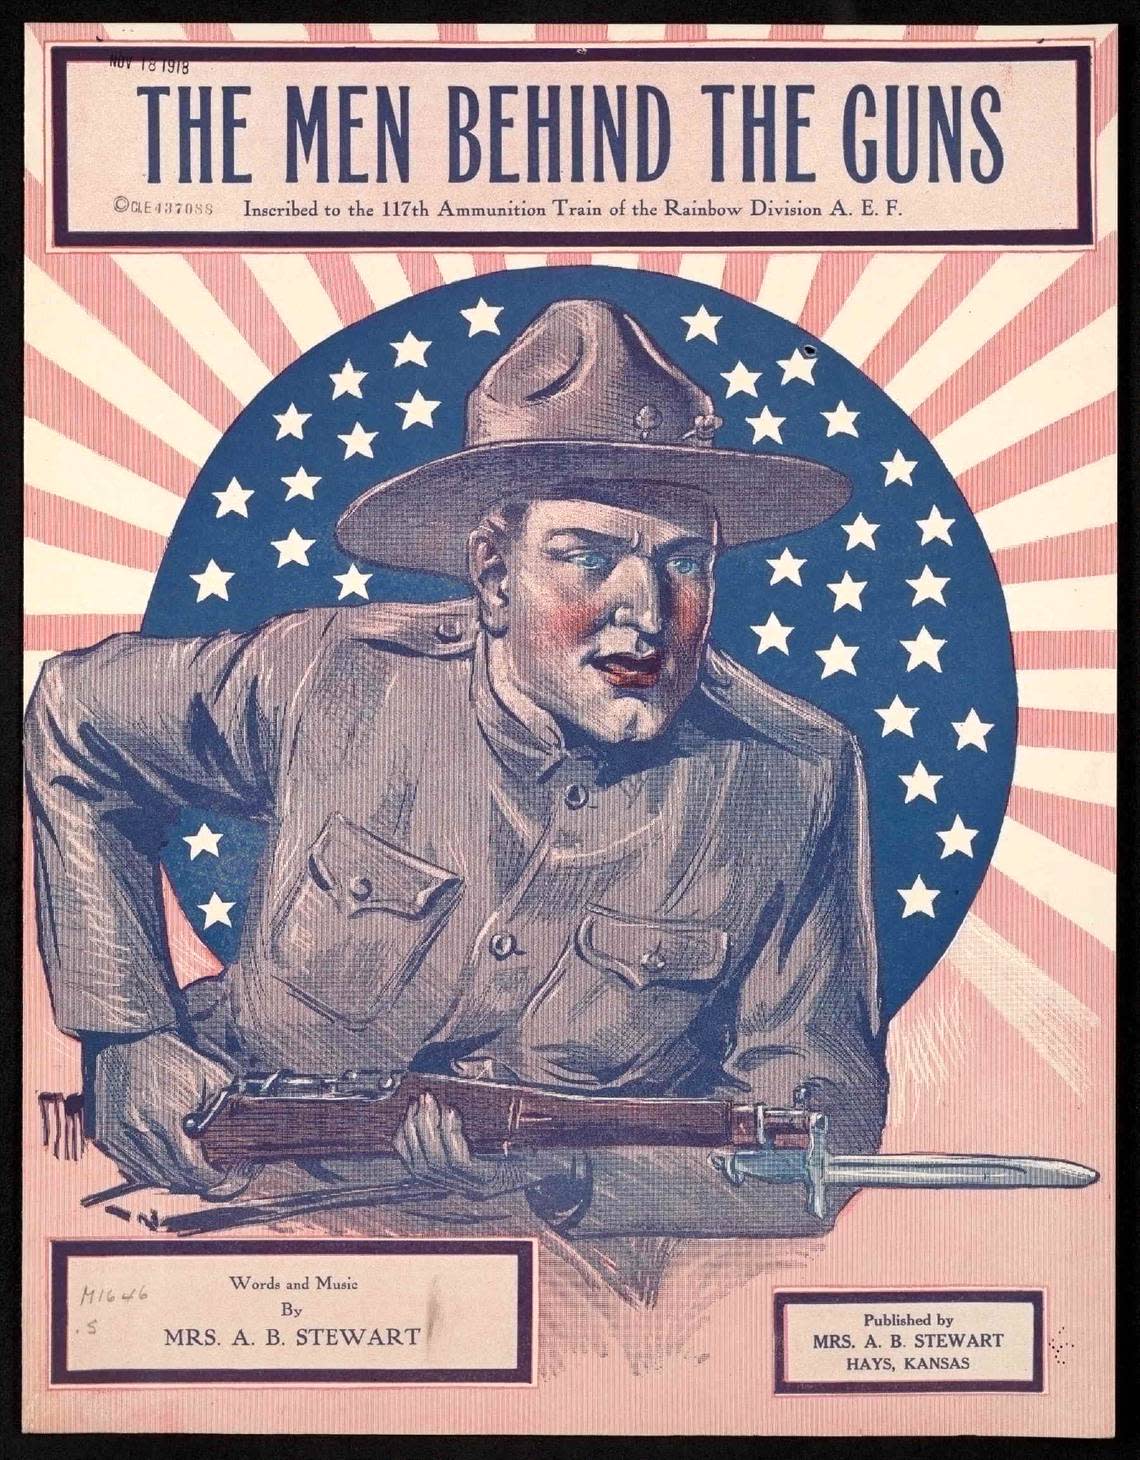 Sheet music inscribed to the 117th Ammunition Train of the Rainbow Division.